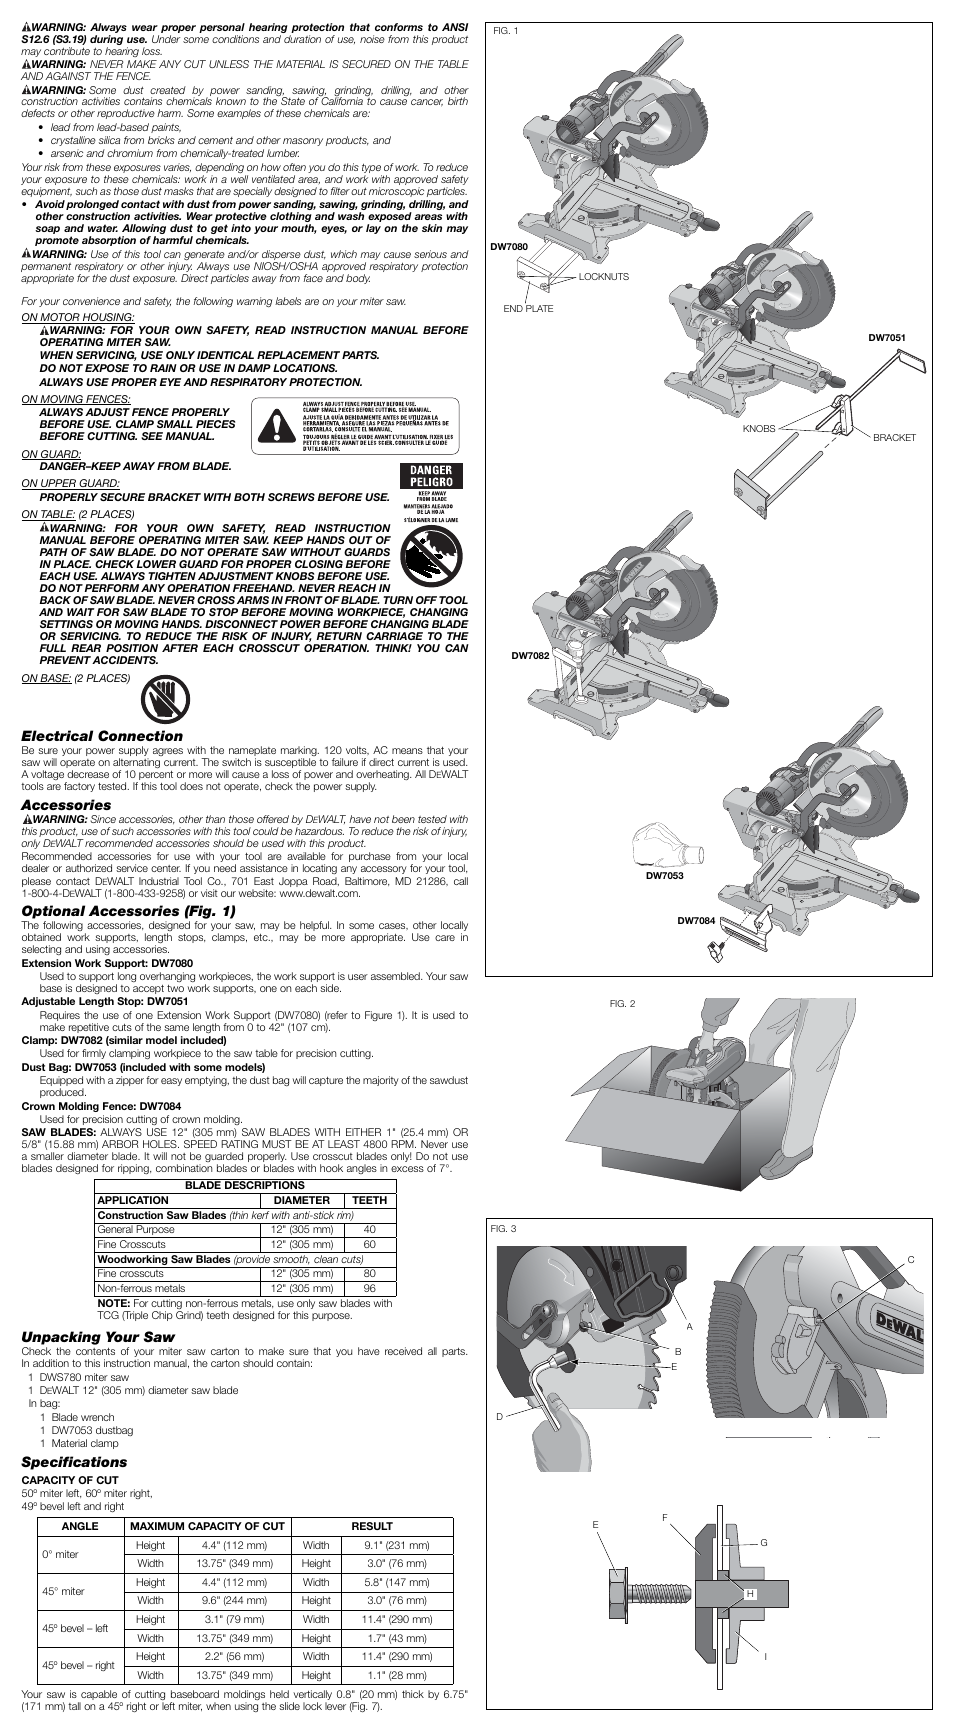 Electrical connection, Accessories, Optional accessories (fig. 1) | DeWalt  Double Bevel Sliding Compound Miter Saw DWS780 User Manual | Page 2 / 7 |  Original mode